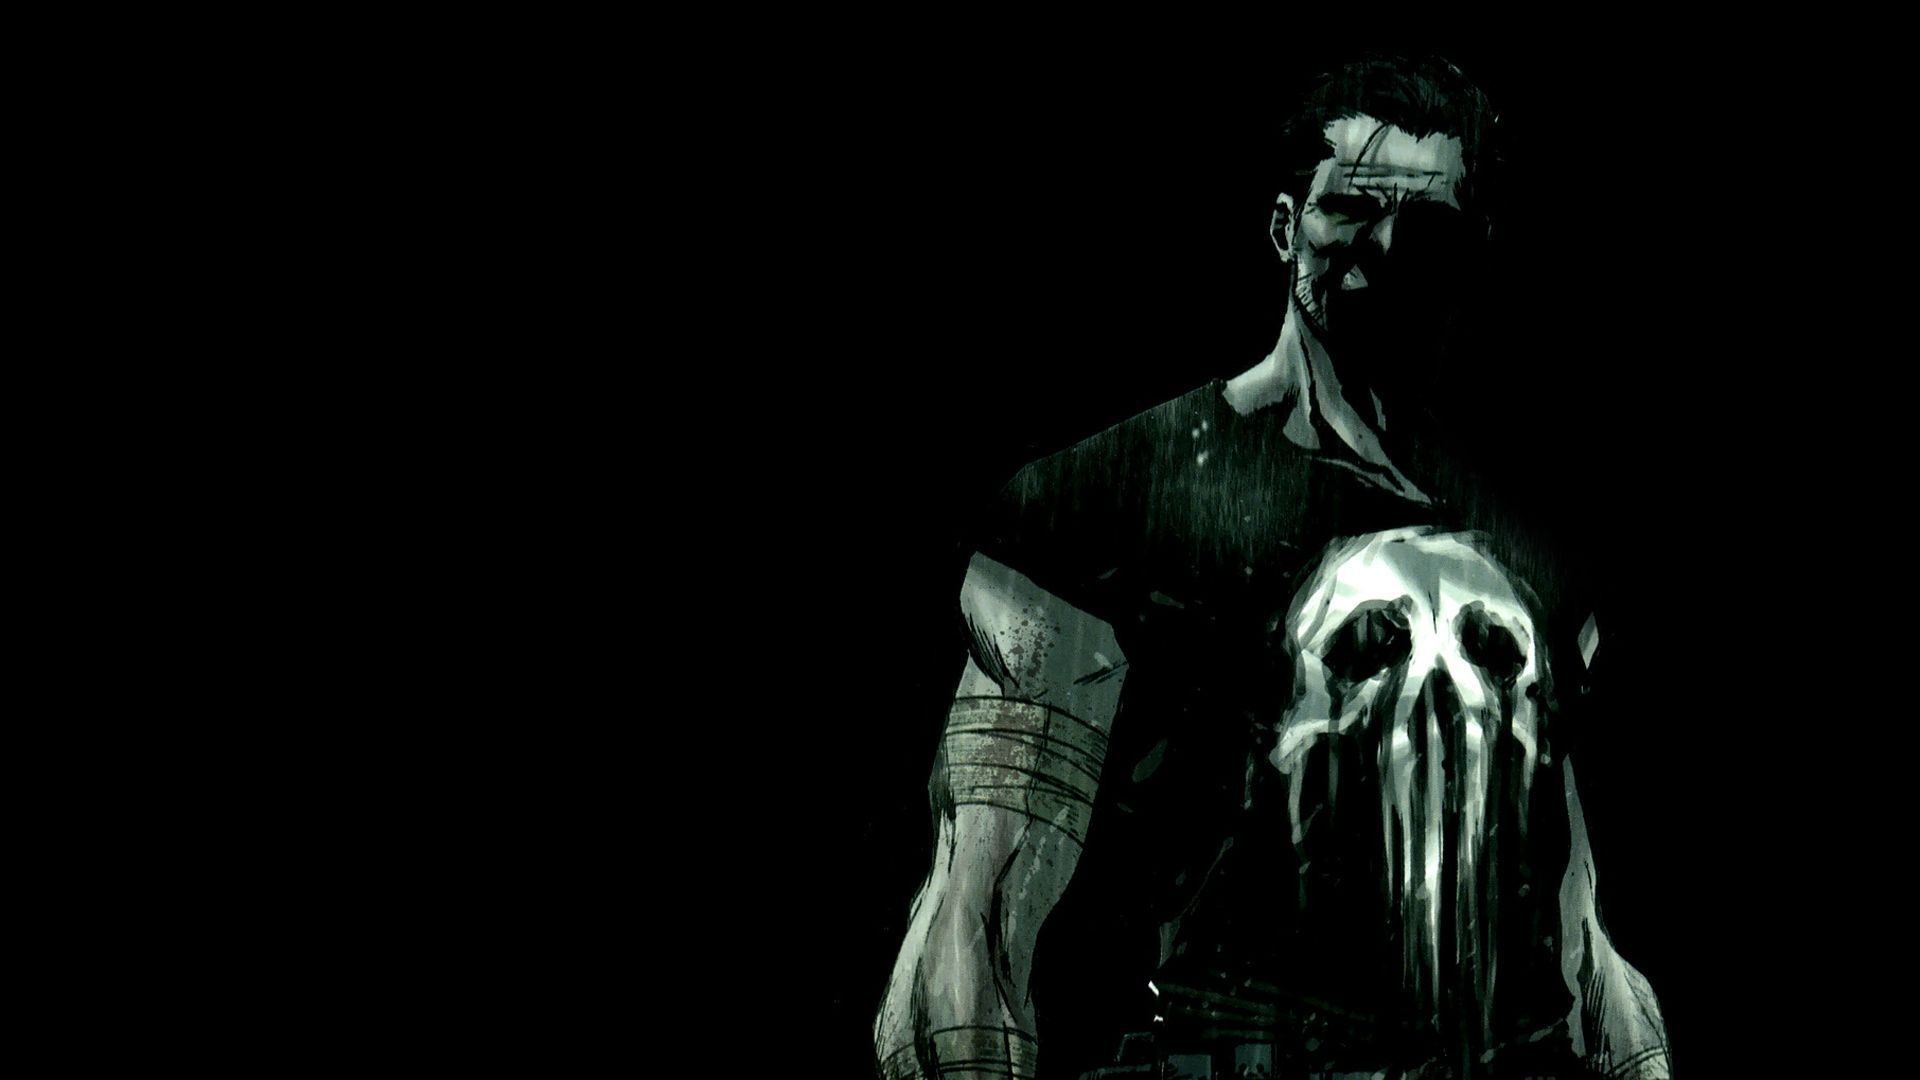 Punisher wallpaper backgrounds hd kB by Stede Murphy HD Wallpapers Pinterest Punisher